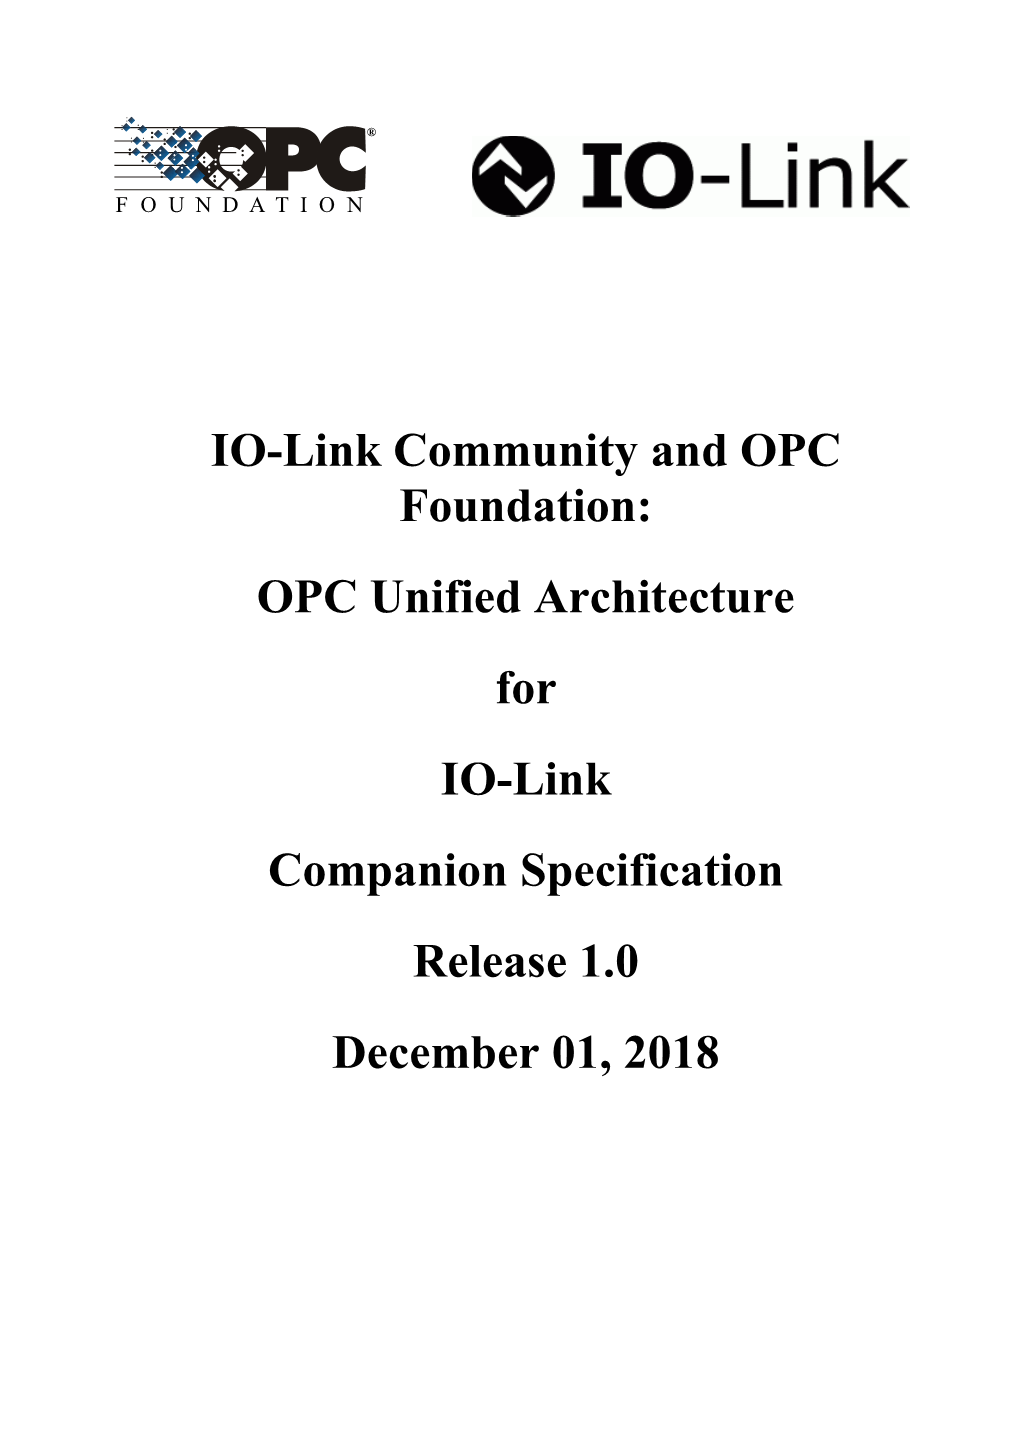 OPC Unified Architecture for IO-Link Companion Specification Release 1.0 December 01, 2018